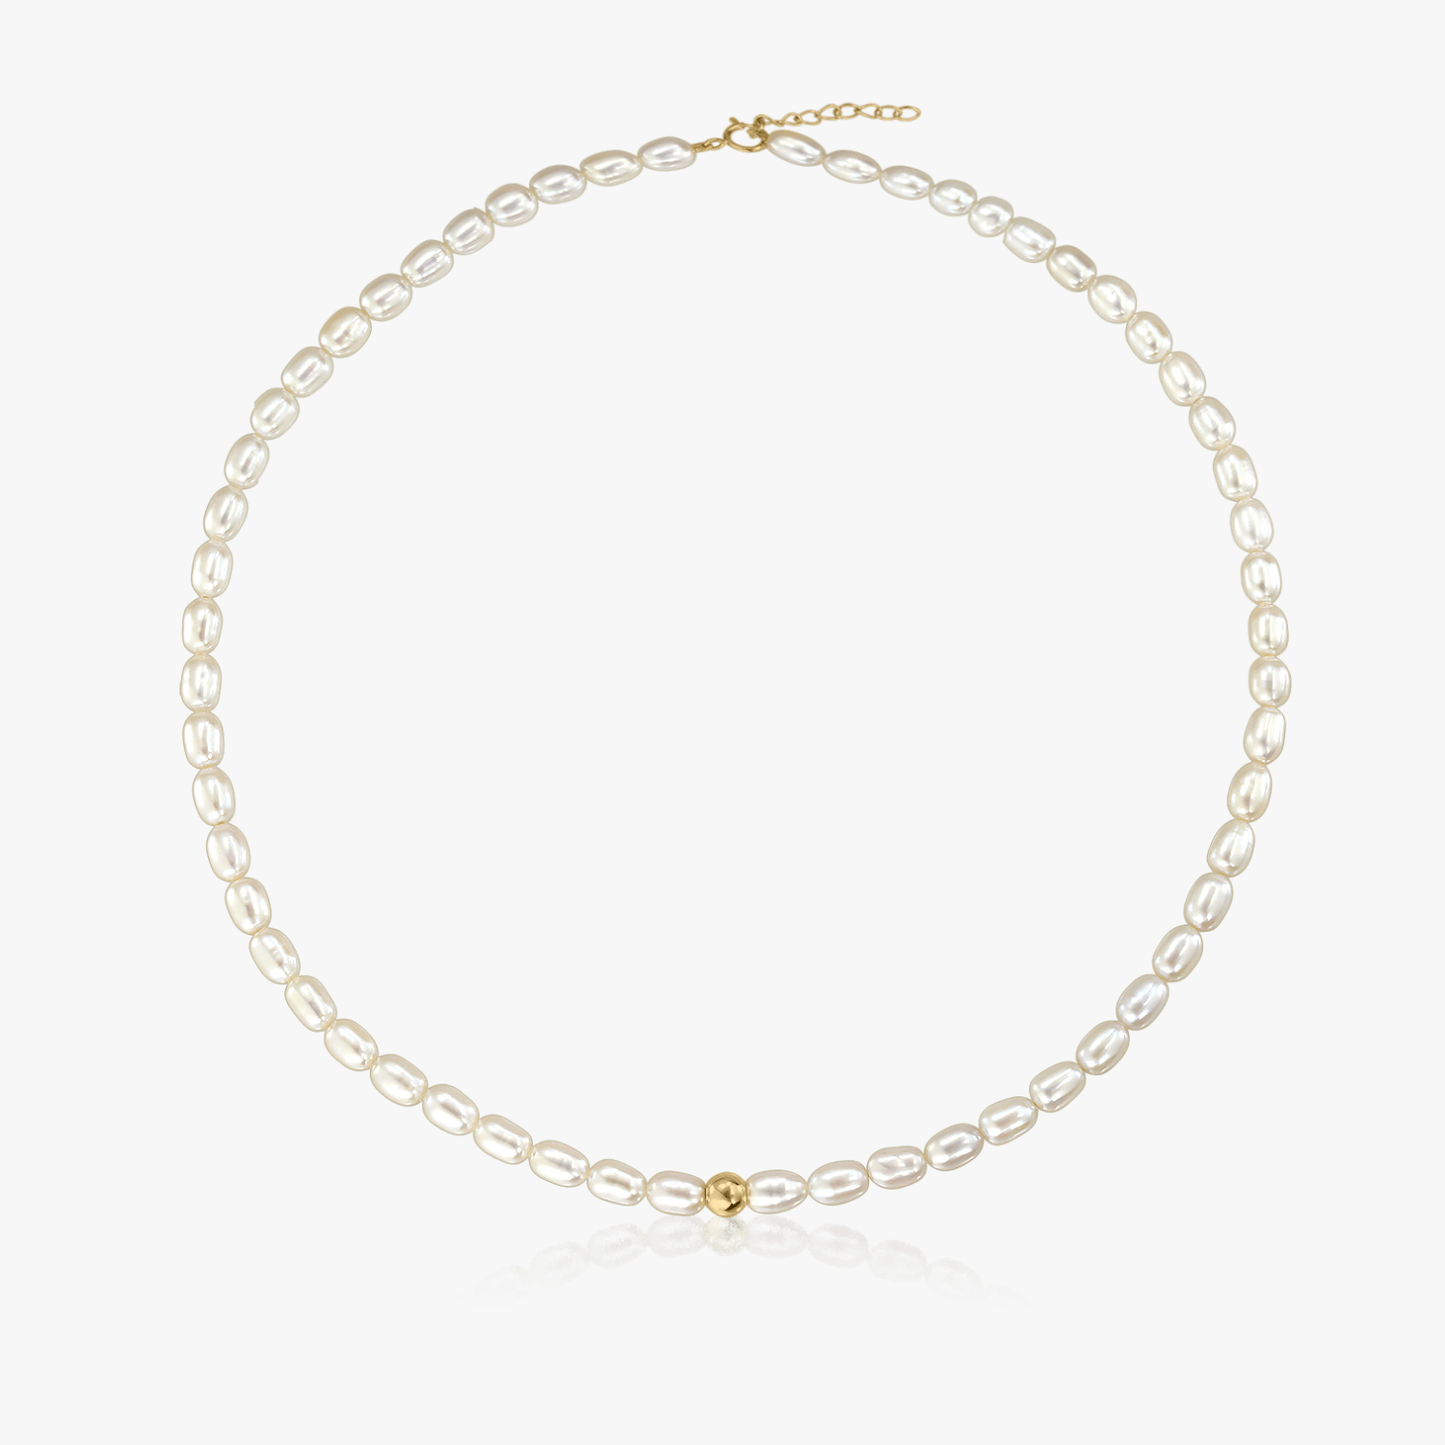 Faye gold necklace - Natural pearls